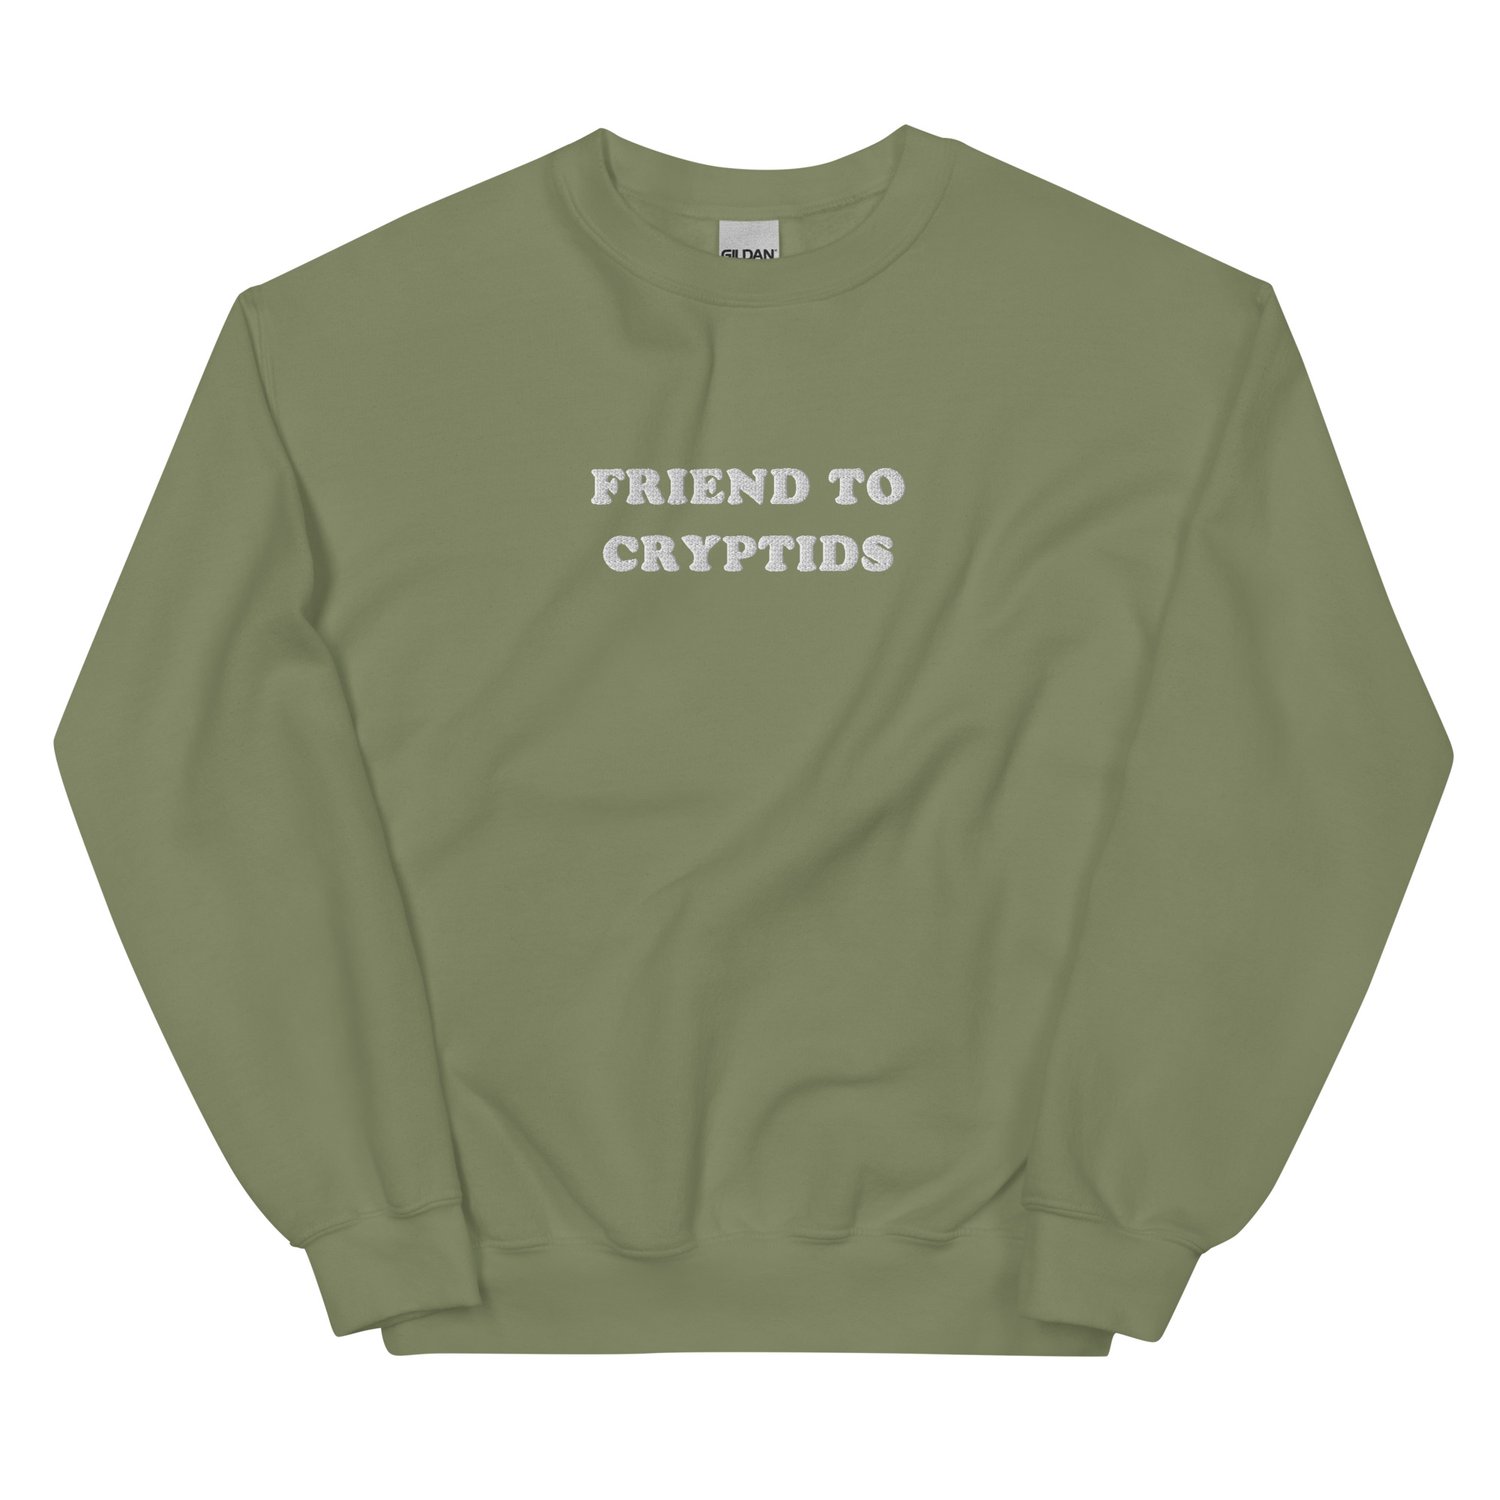 Image of Friend to Cryptids embroidered sweatshirt